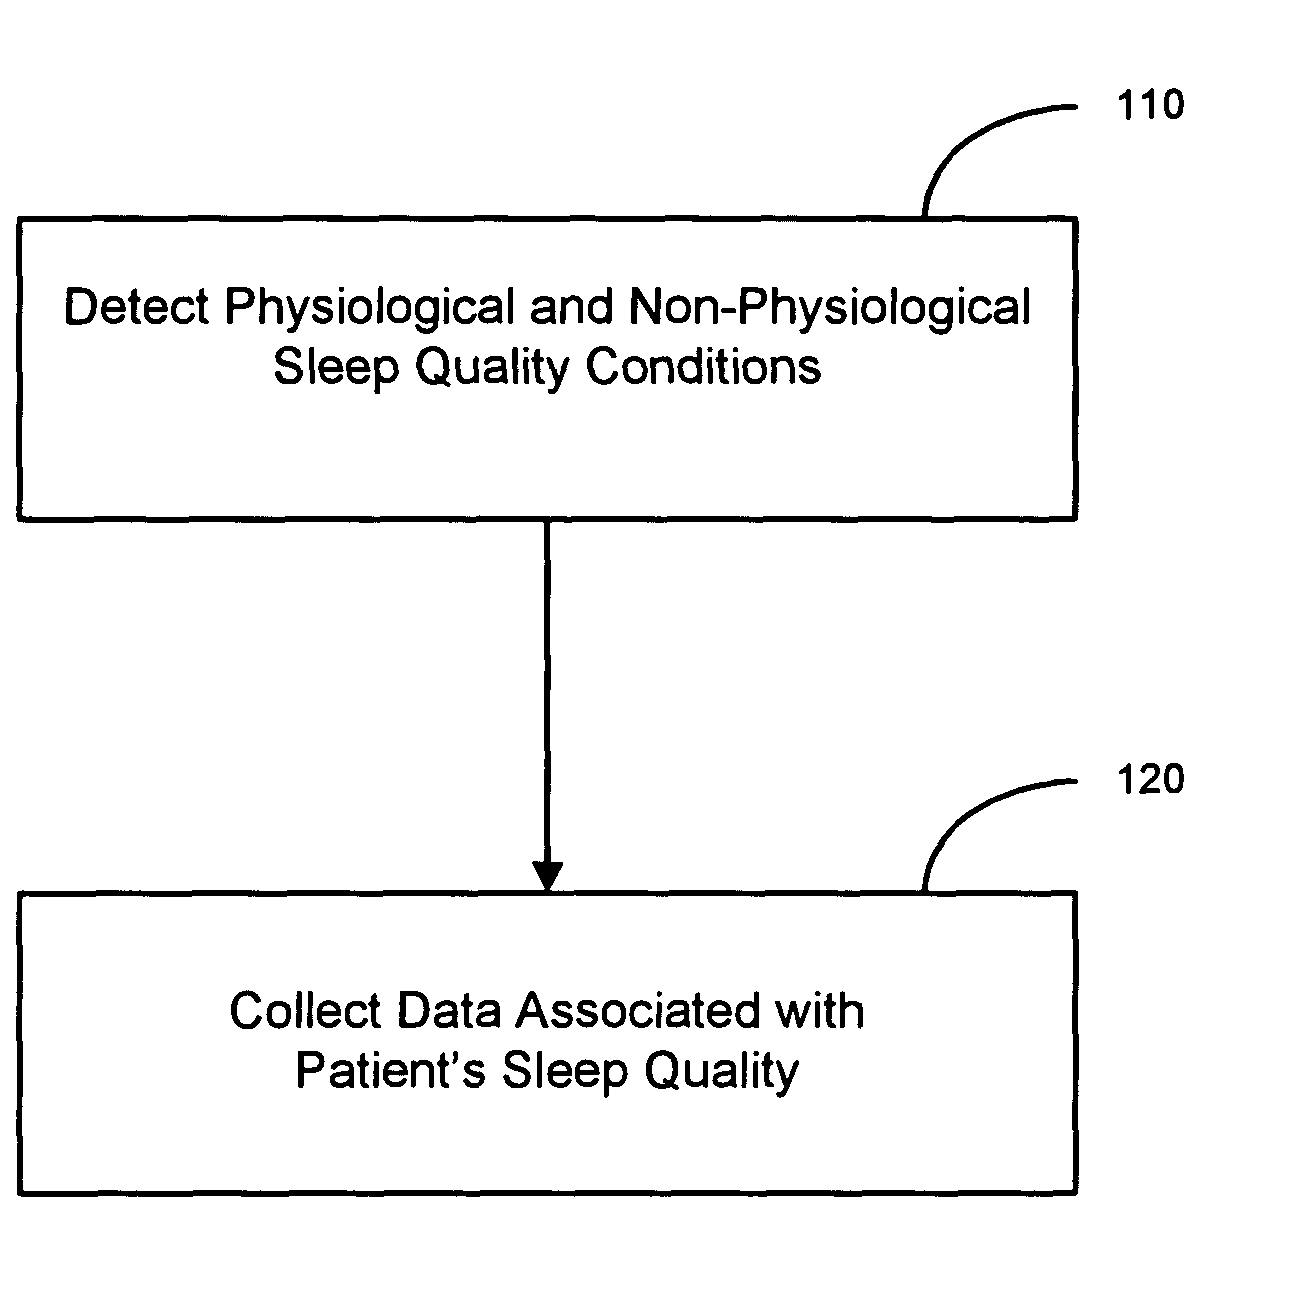 Sleep quality data collection and evaluation